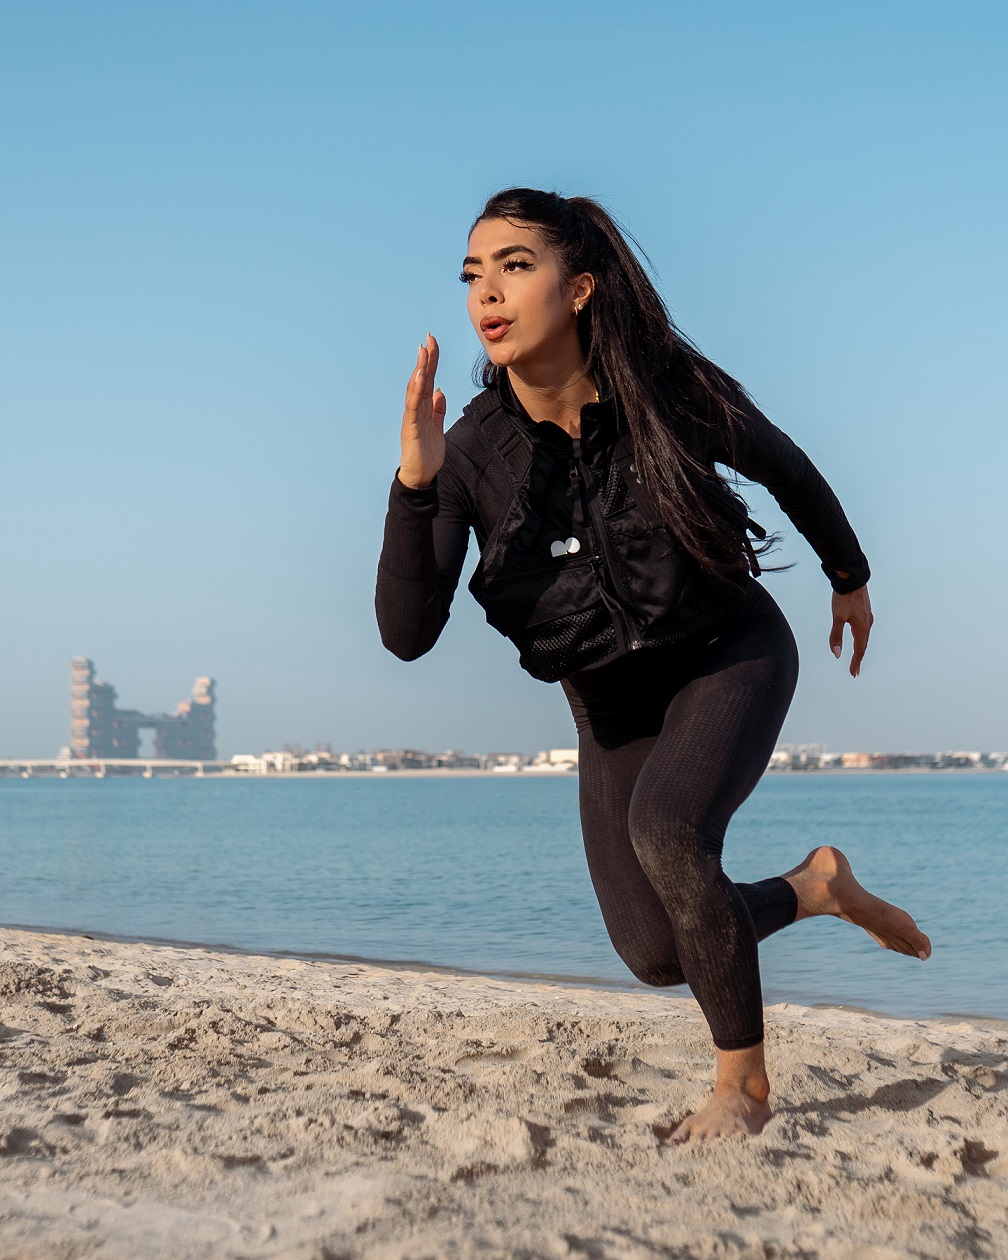 Inaugural ‘Active on the Beach’ Festival Offers Fitness Lovers Chance to Train Safely During Ramadan with Yoga, Core and Low-Intensity Sessions